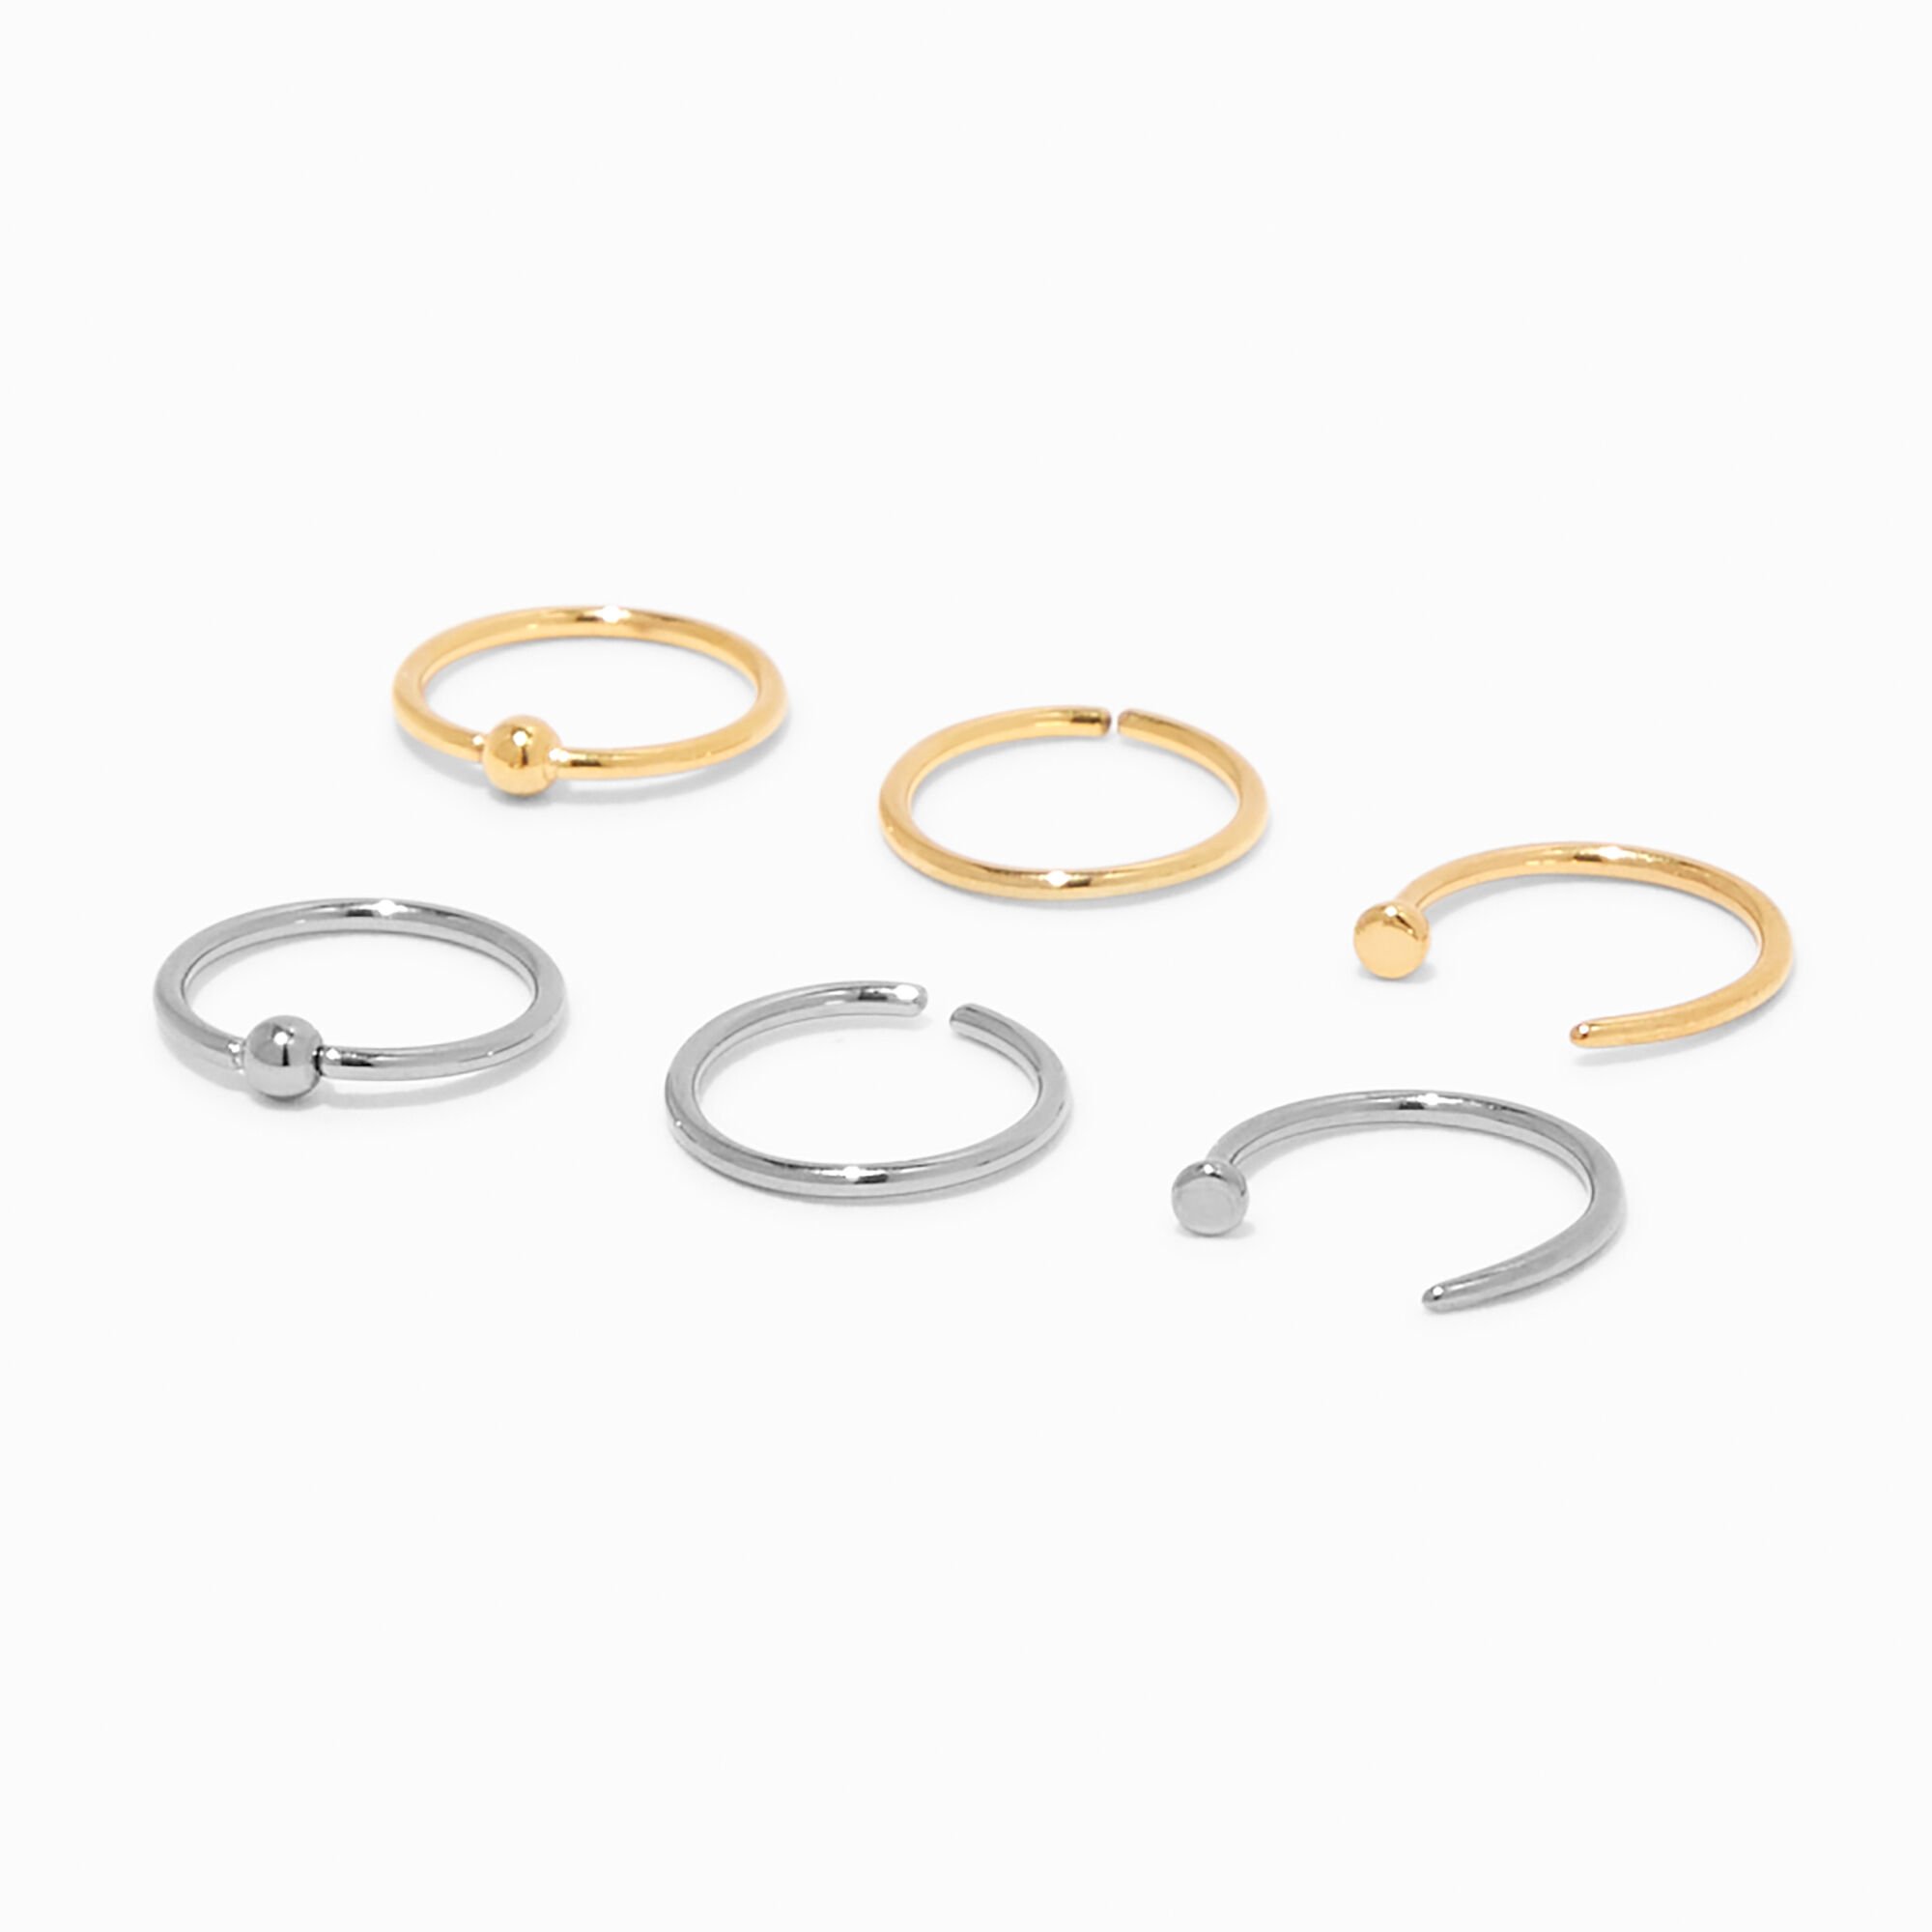 View Claires Mixed Metal Titanium 20G Ball Stud Hoop Nose Rings 6 Pack Gold information